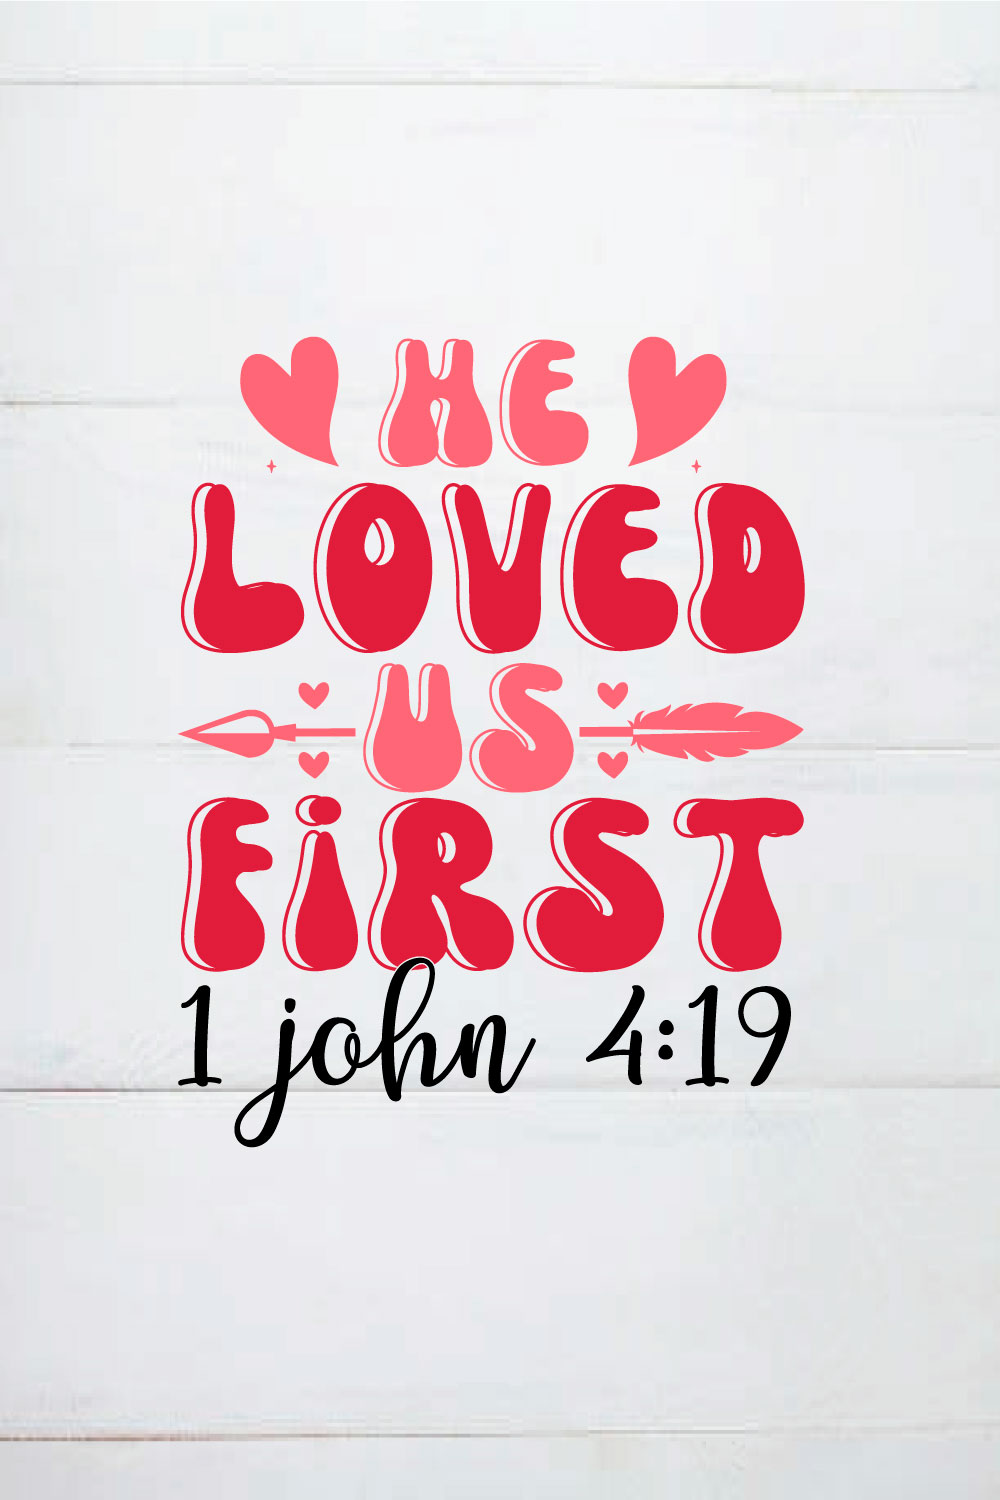 he loved us first 1 john 4:19 retro pinterest preview image.